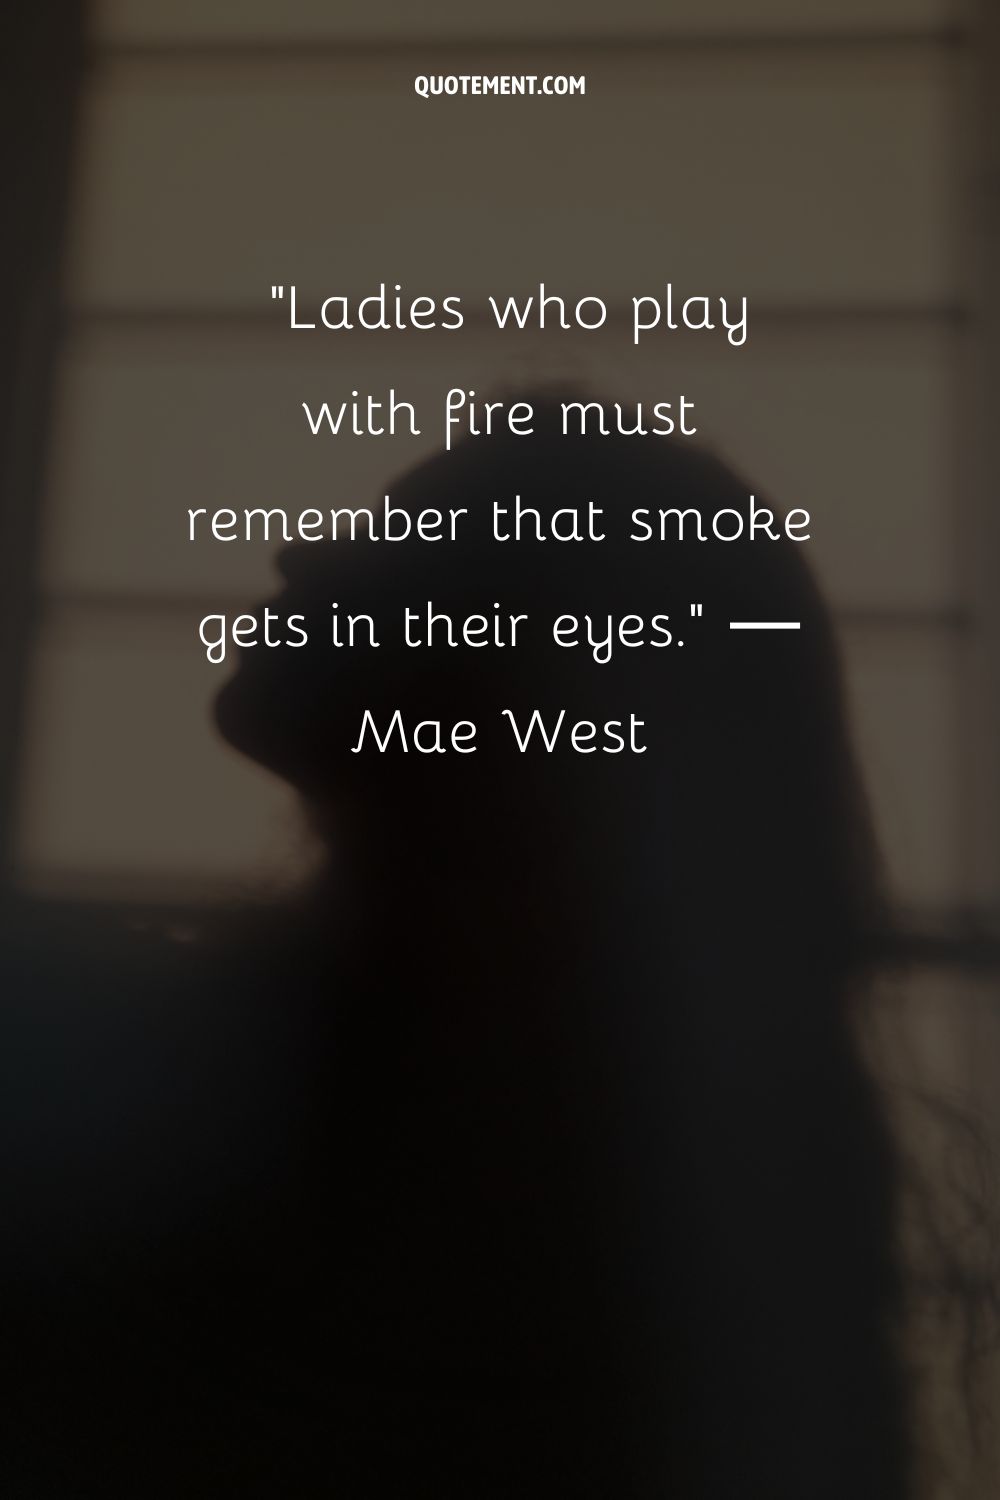 Ladies who play with fire must remember that smoke gets in their eyes